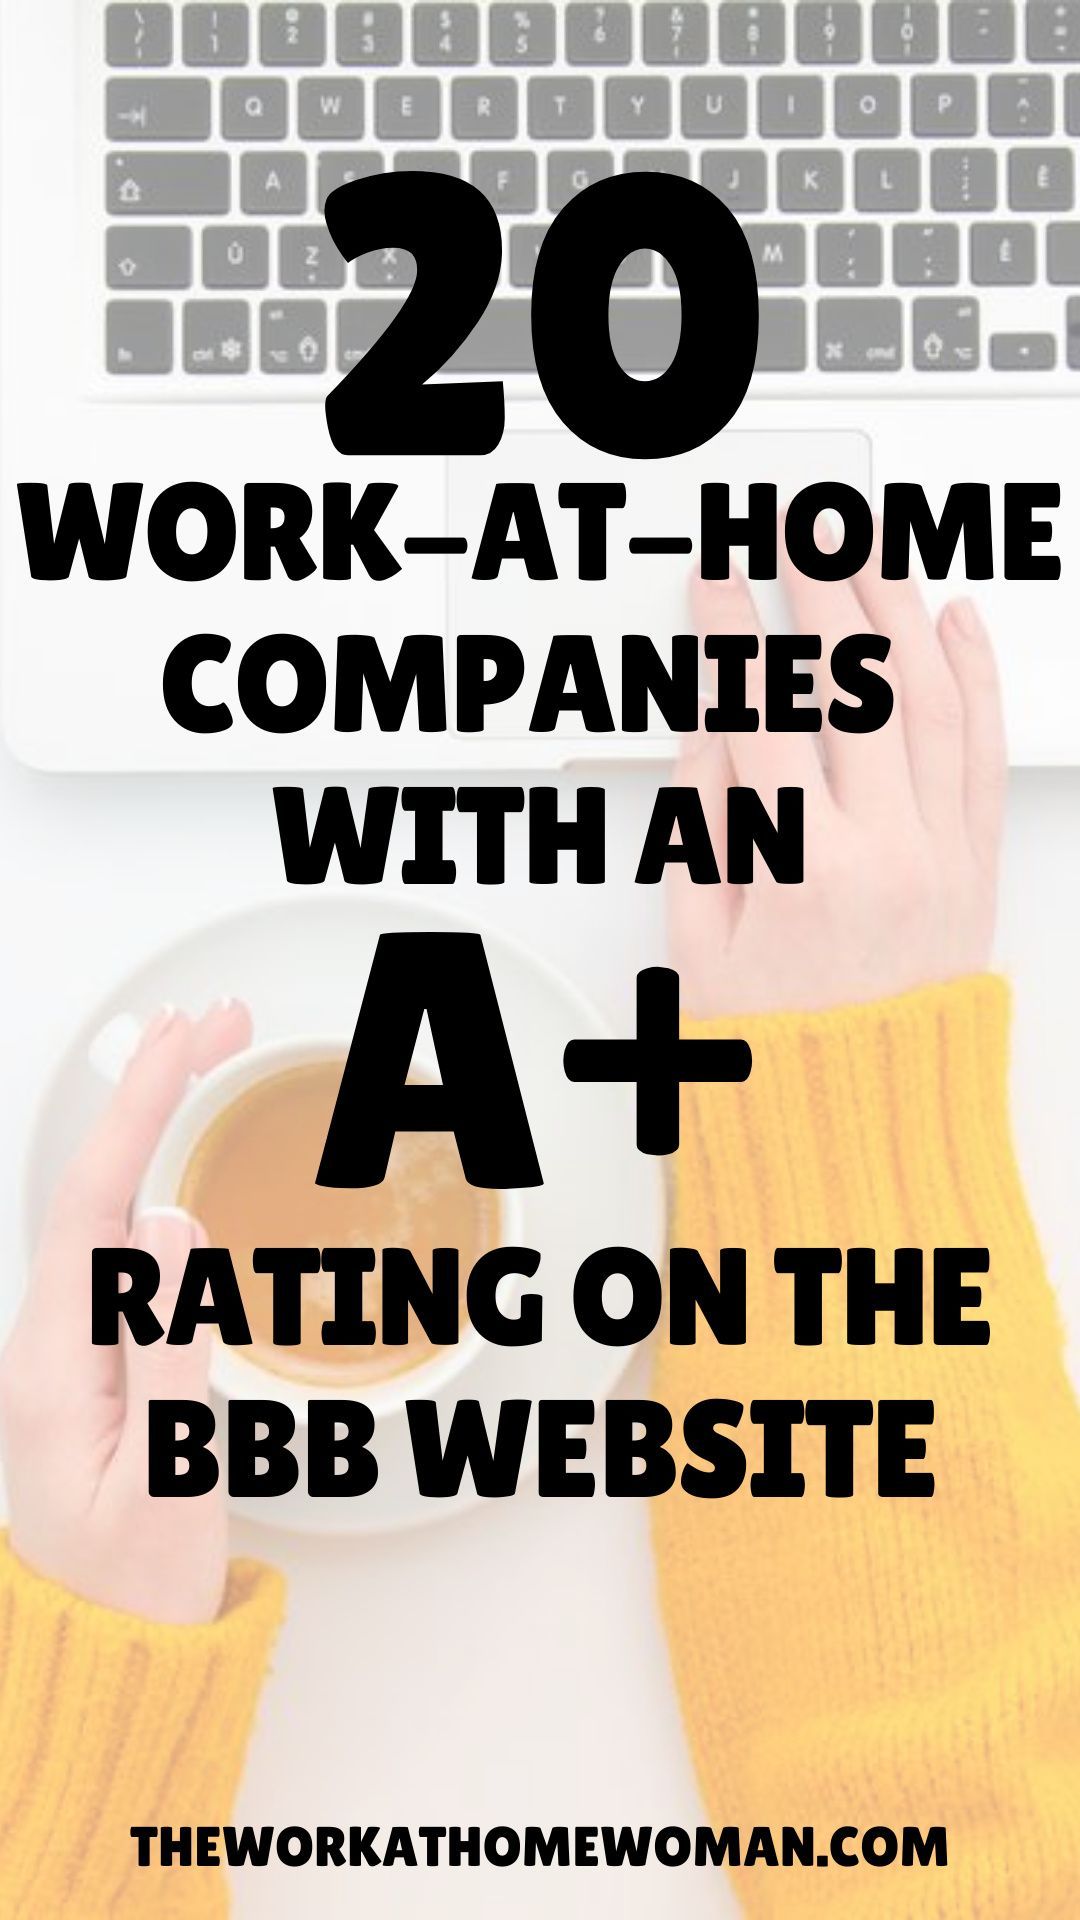 2aa2129568df754cb8ecb28bf205e9c9 - 20 Work-at-Home Companies with an A+ Rating on the BBB Website - work-from-home